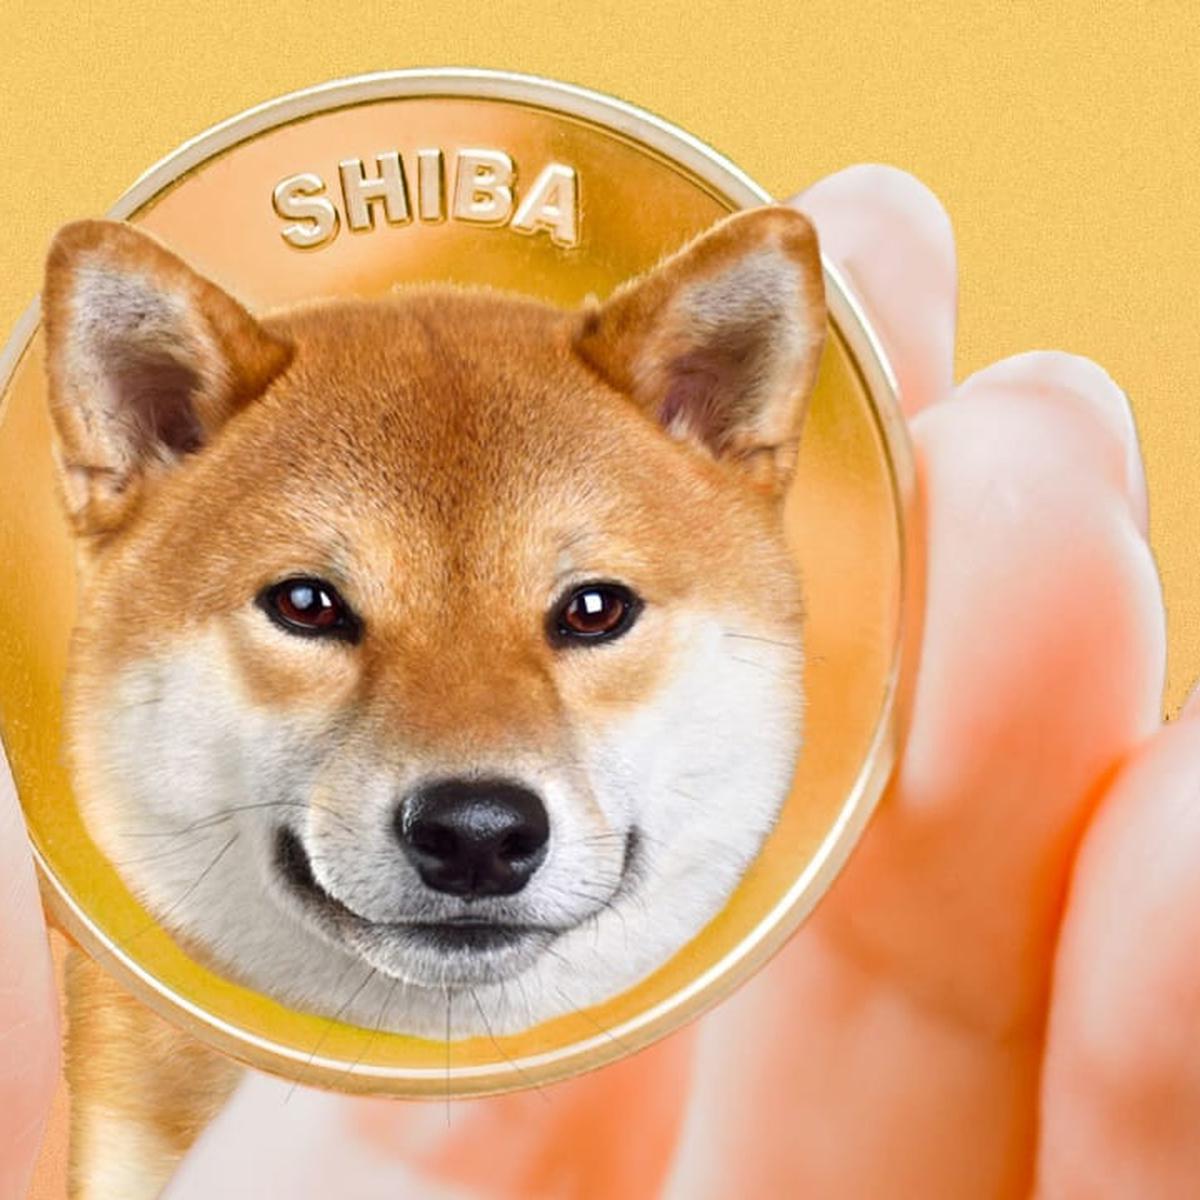 054849500 1635397466 p 1 SHIB coin why is the Shiba Inu cryptocurrency surging